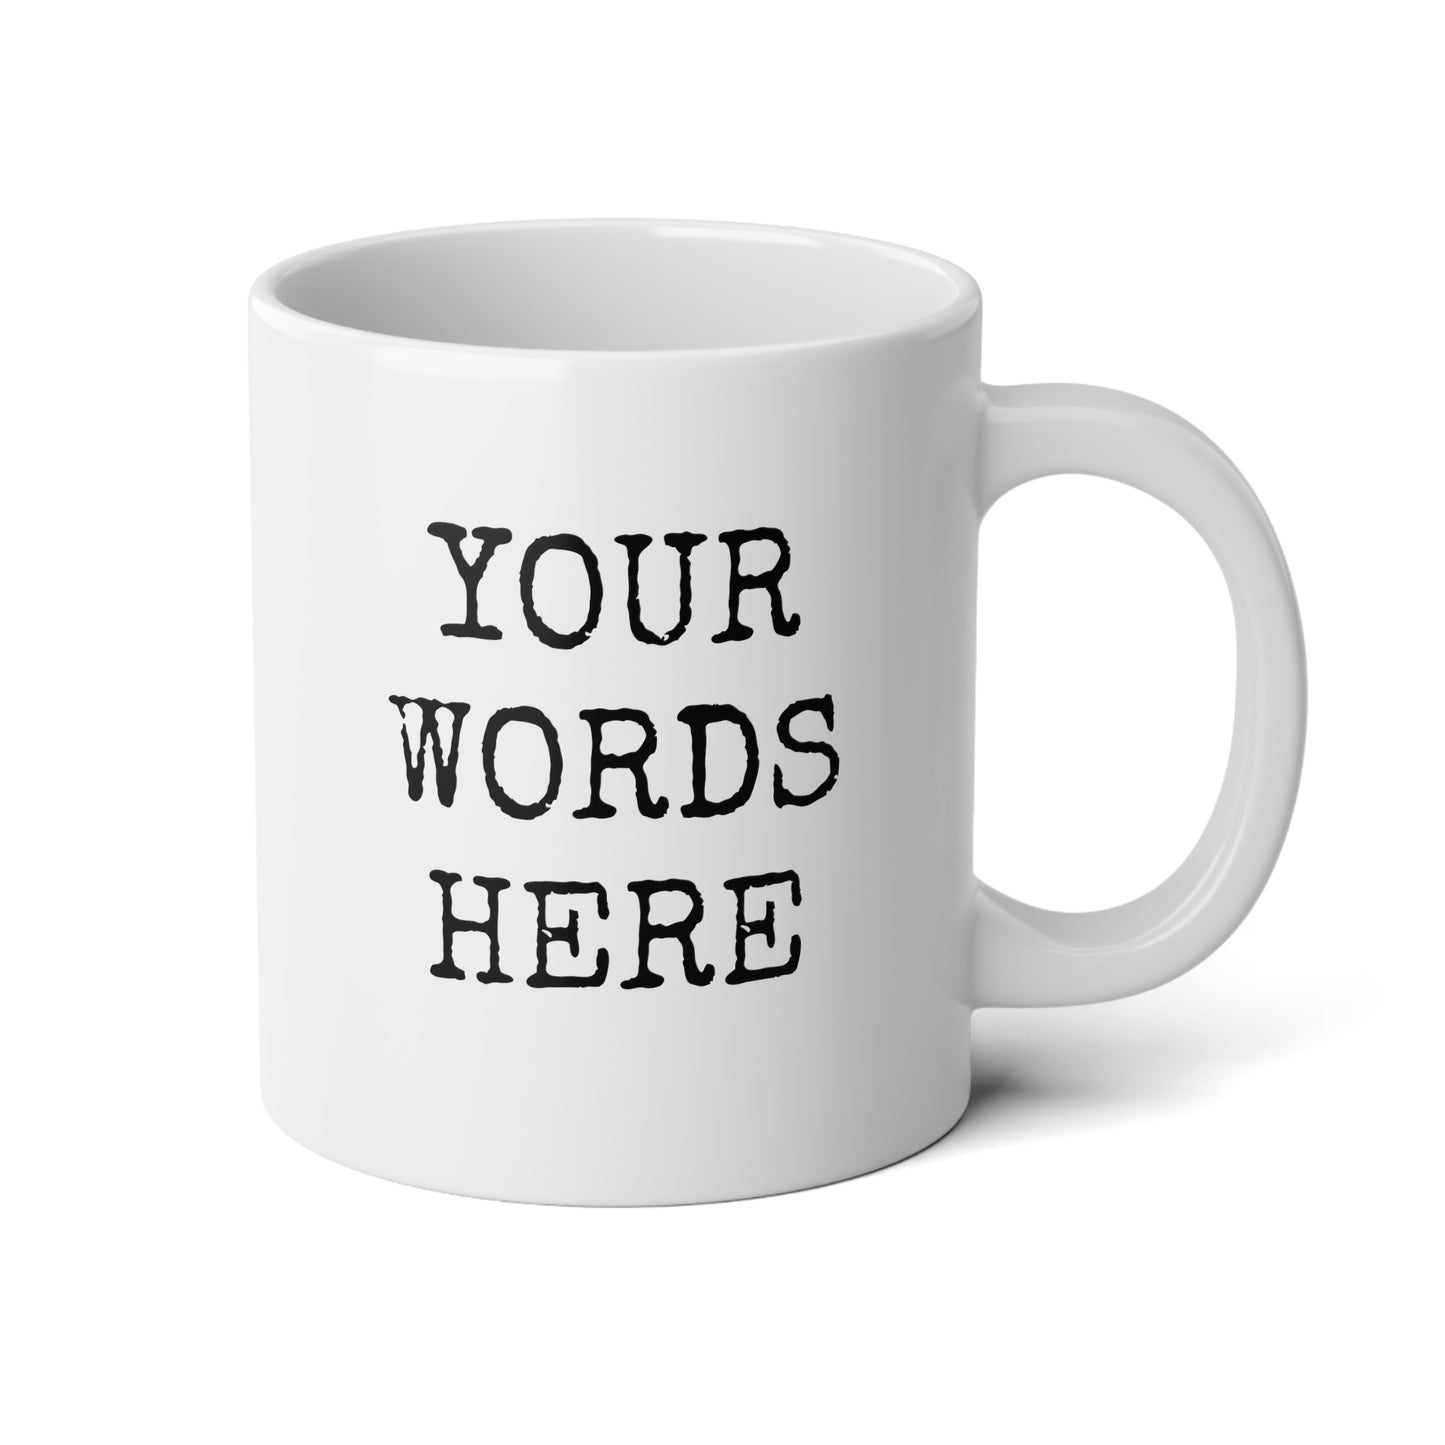 Create Your Own Words Here 20oz white funny large big coffee mug tea cup gift for friend family custom customized text personalized font waveywares wavey wares wavywares wavy wares